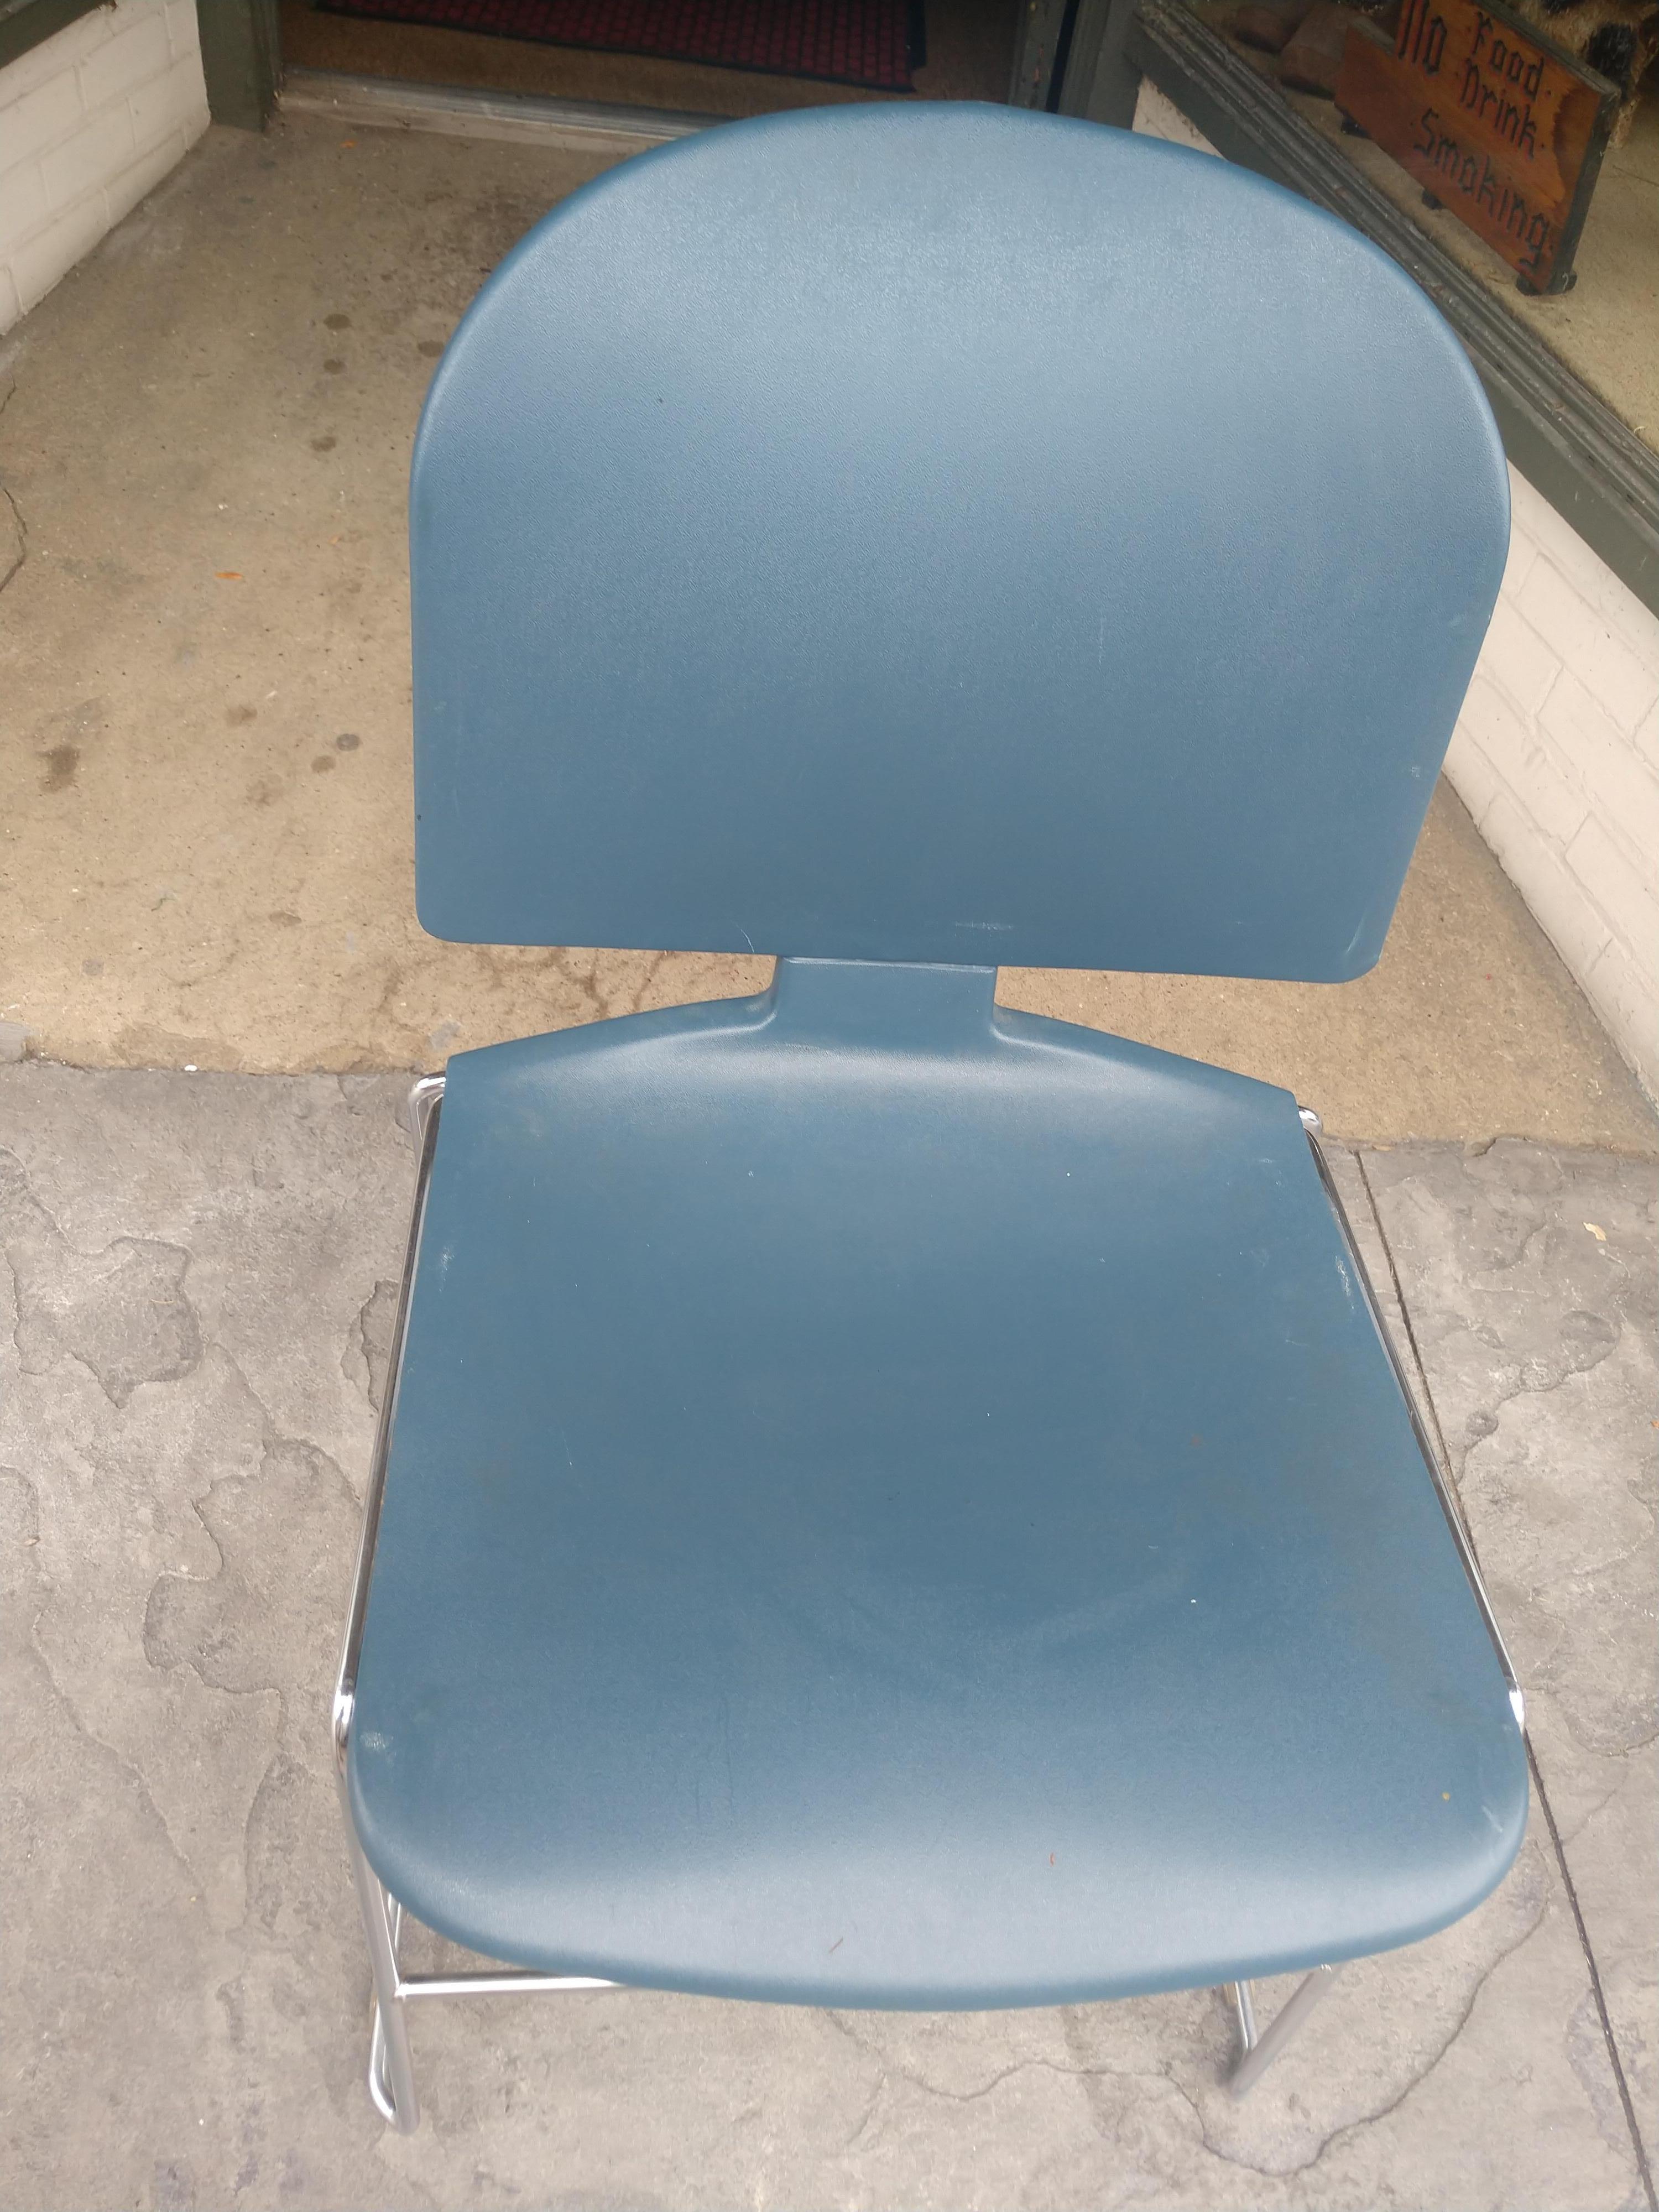 Fabulous chromed steel tubes with hard plastic seats that are very comfortable and stack as high as need be. Blue and black in color. Some scratches nothing very deep. Seat hgt is 17.25. Priced individually. Great for a conference or dining room.